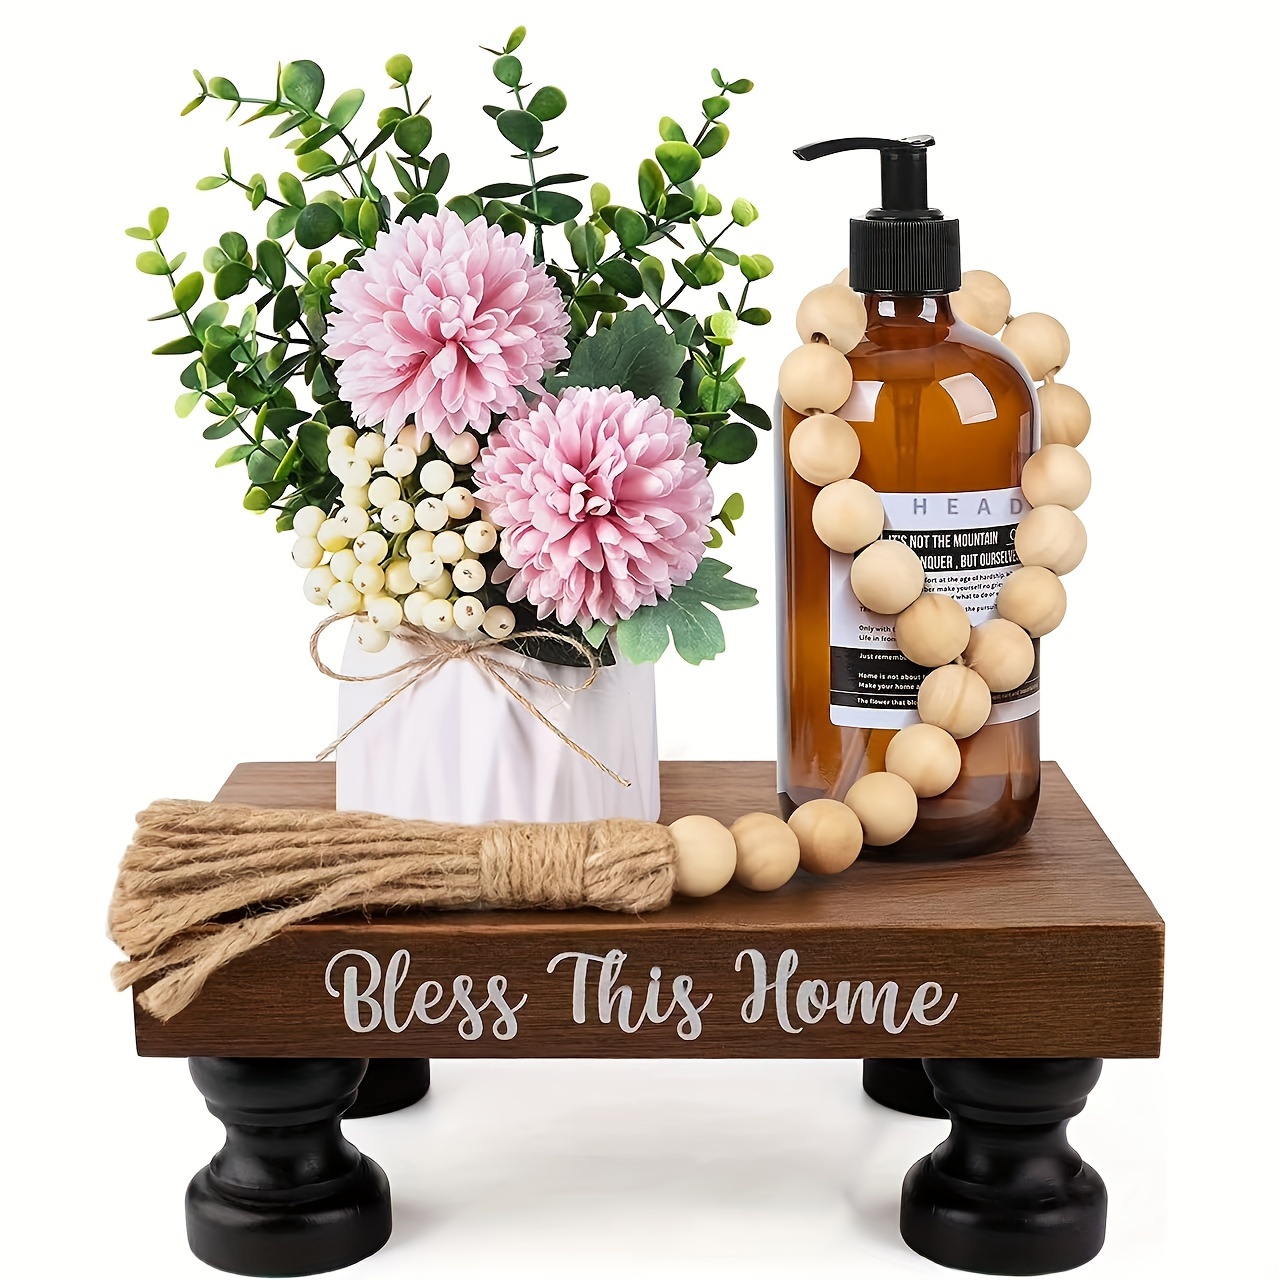 

1pc, Rustic Wooden Display Stand, Bless This Home Sign, Farmhouse Mini Stool Riser, 7.8x5.5 Inch Solid Wood Decorative Base For Home Decor, Bathroom Soap Tray Holder